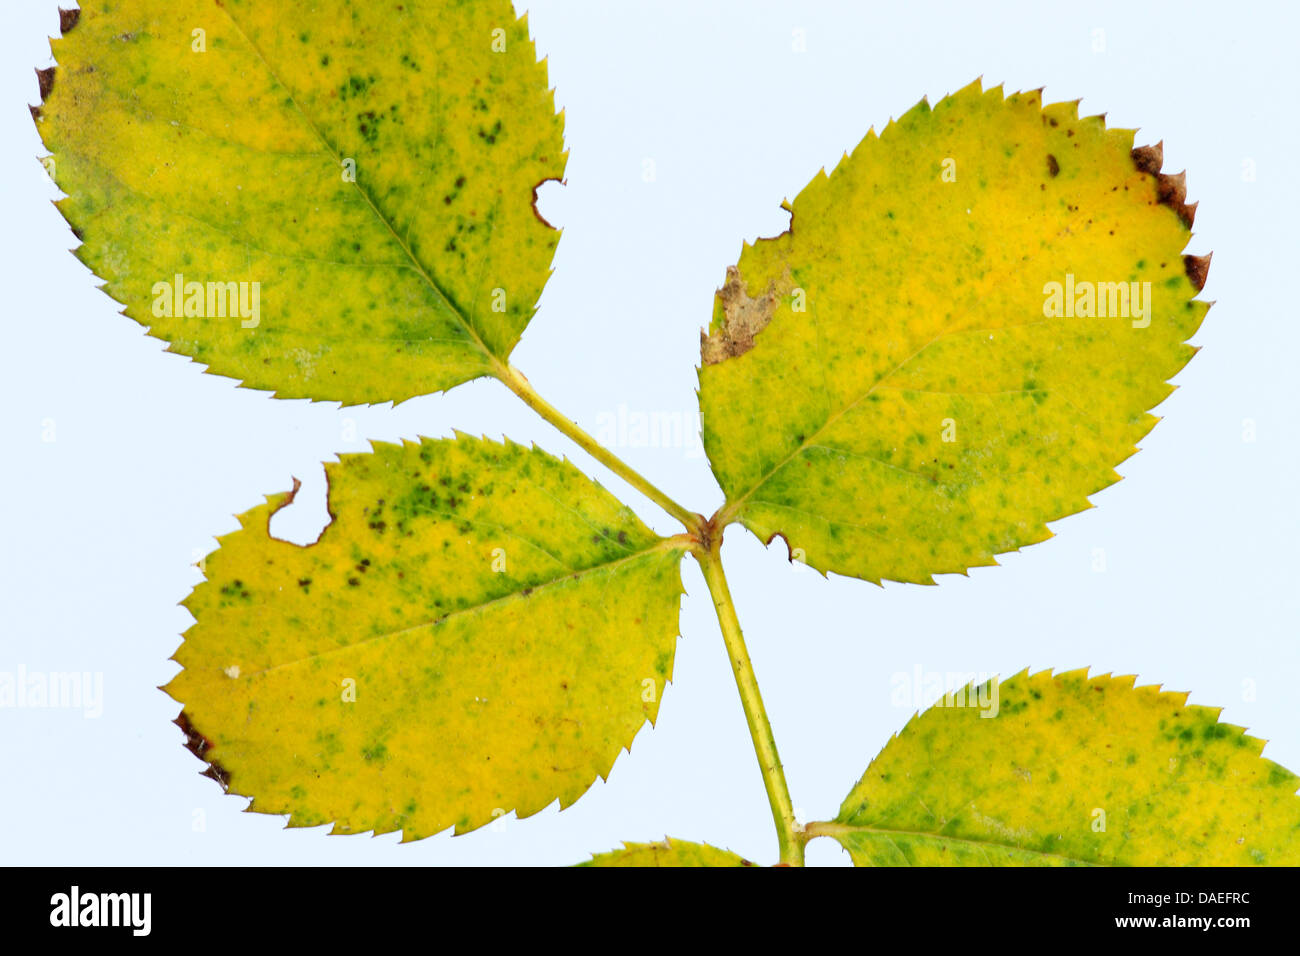 detail of withering an rose leaf in autumn, Germany Stock Photo